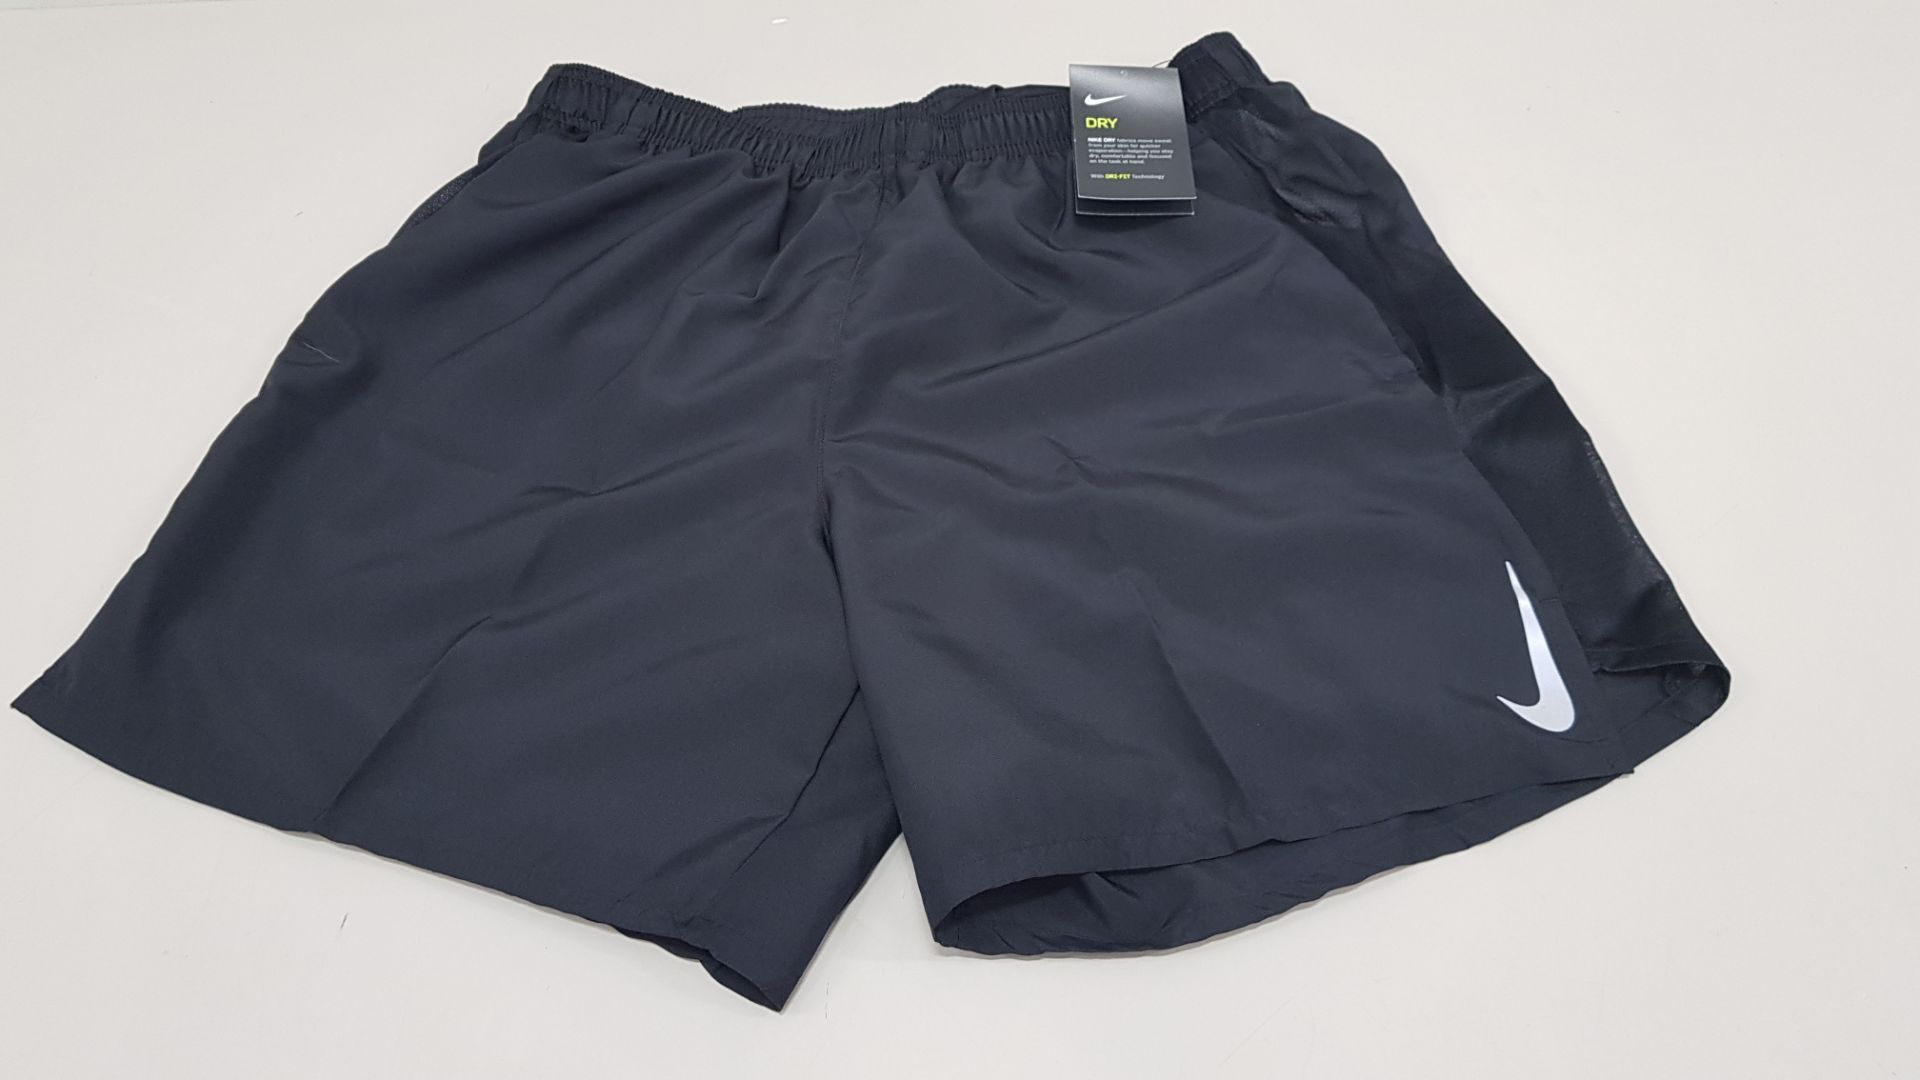 10 X BRAND NEW NIKE DRY FIT TECHNOLOGY BLACK SHORTS SIZE LARGE